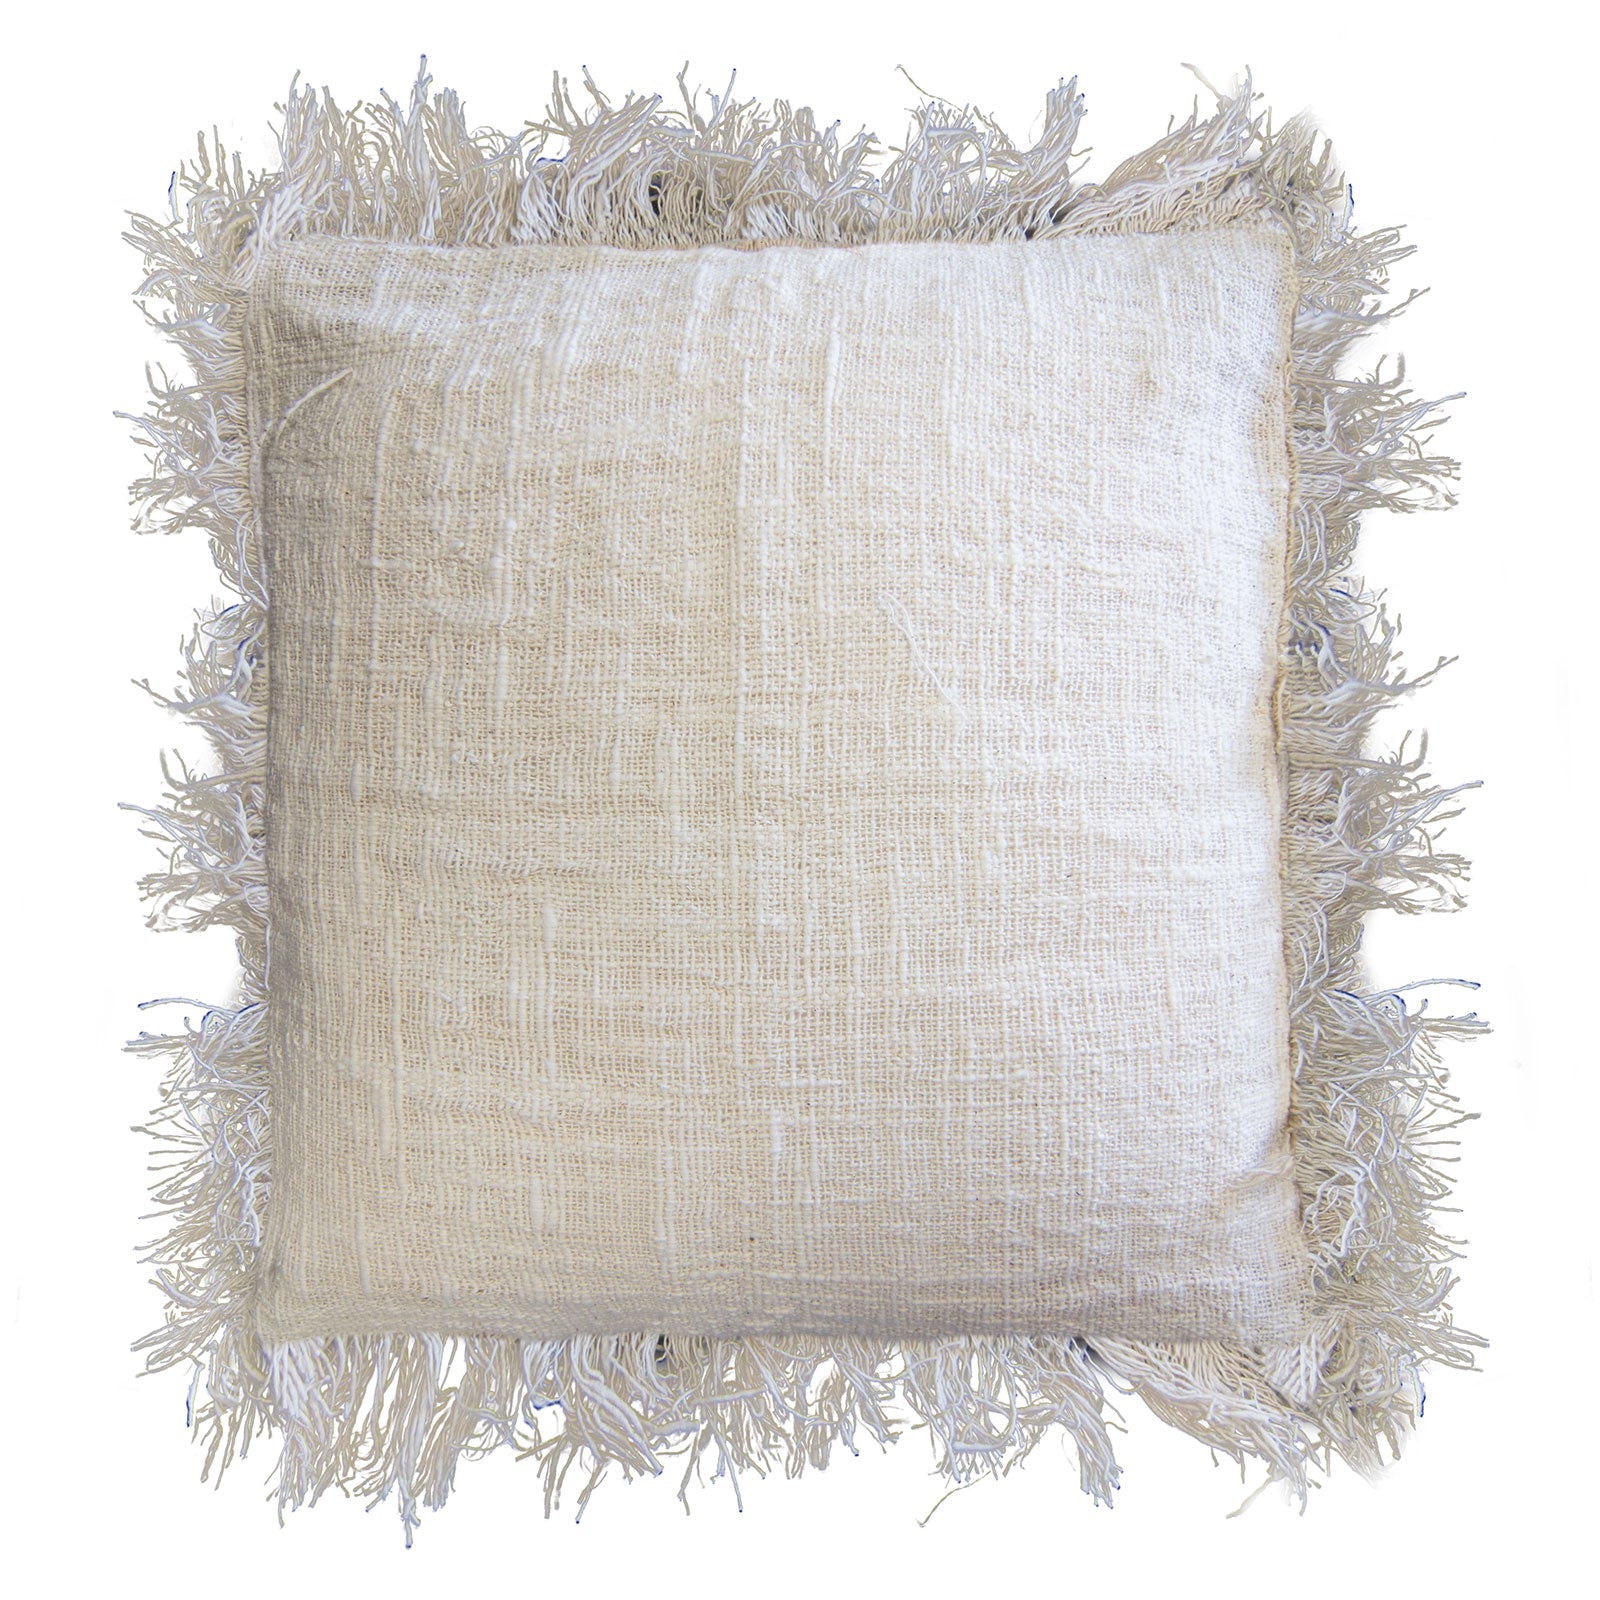 View Linen Cushion 60x60cm with fringe information